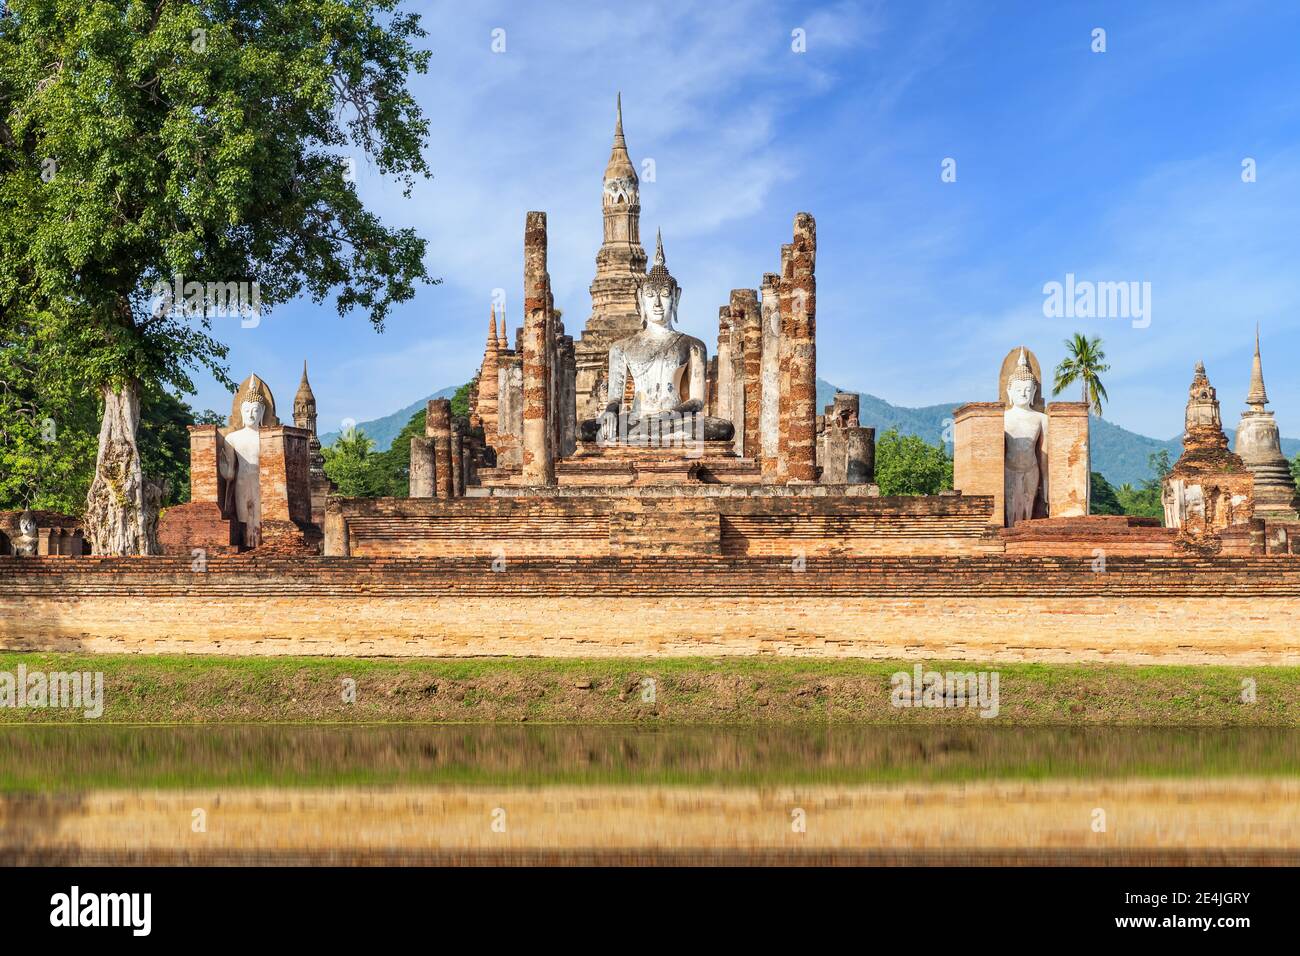 Buddha statue and Pagoda in ruined monastery complex at Wat Mahathat temple with reflection, Sukhothai Historical Park, Thailand Stock Photo